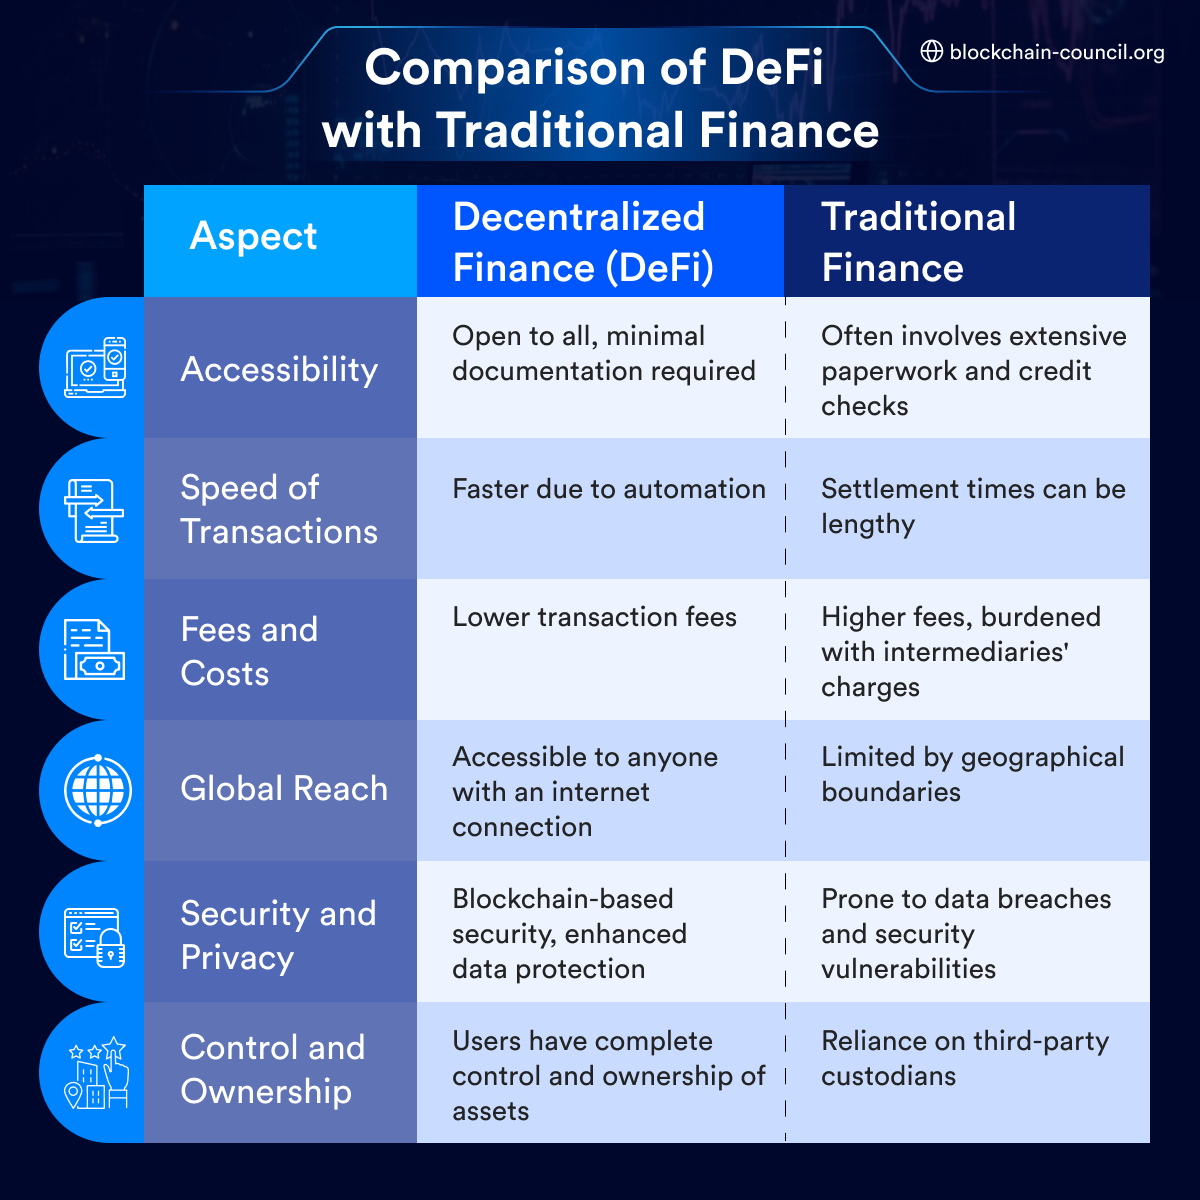 Comparison of DeFi with Traditional Finance